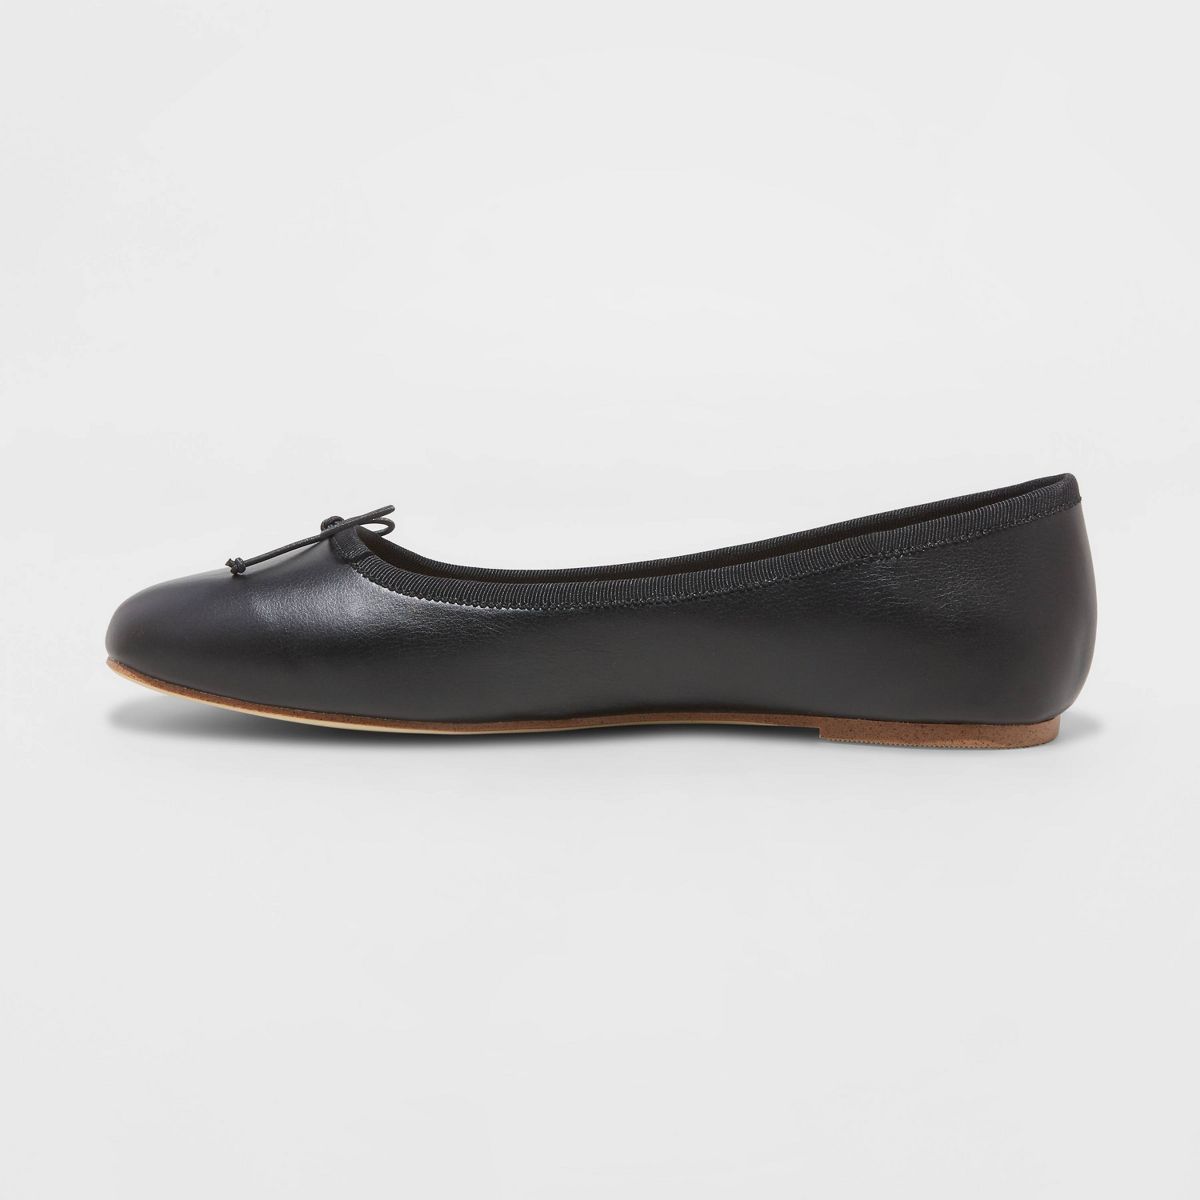 Women's Jackie Ballet Flats - A New Day™ | Target